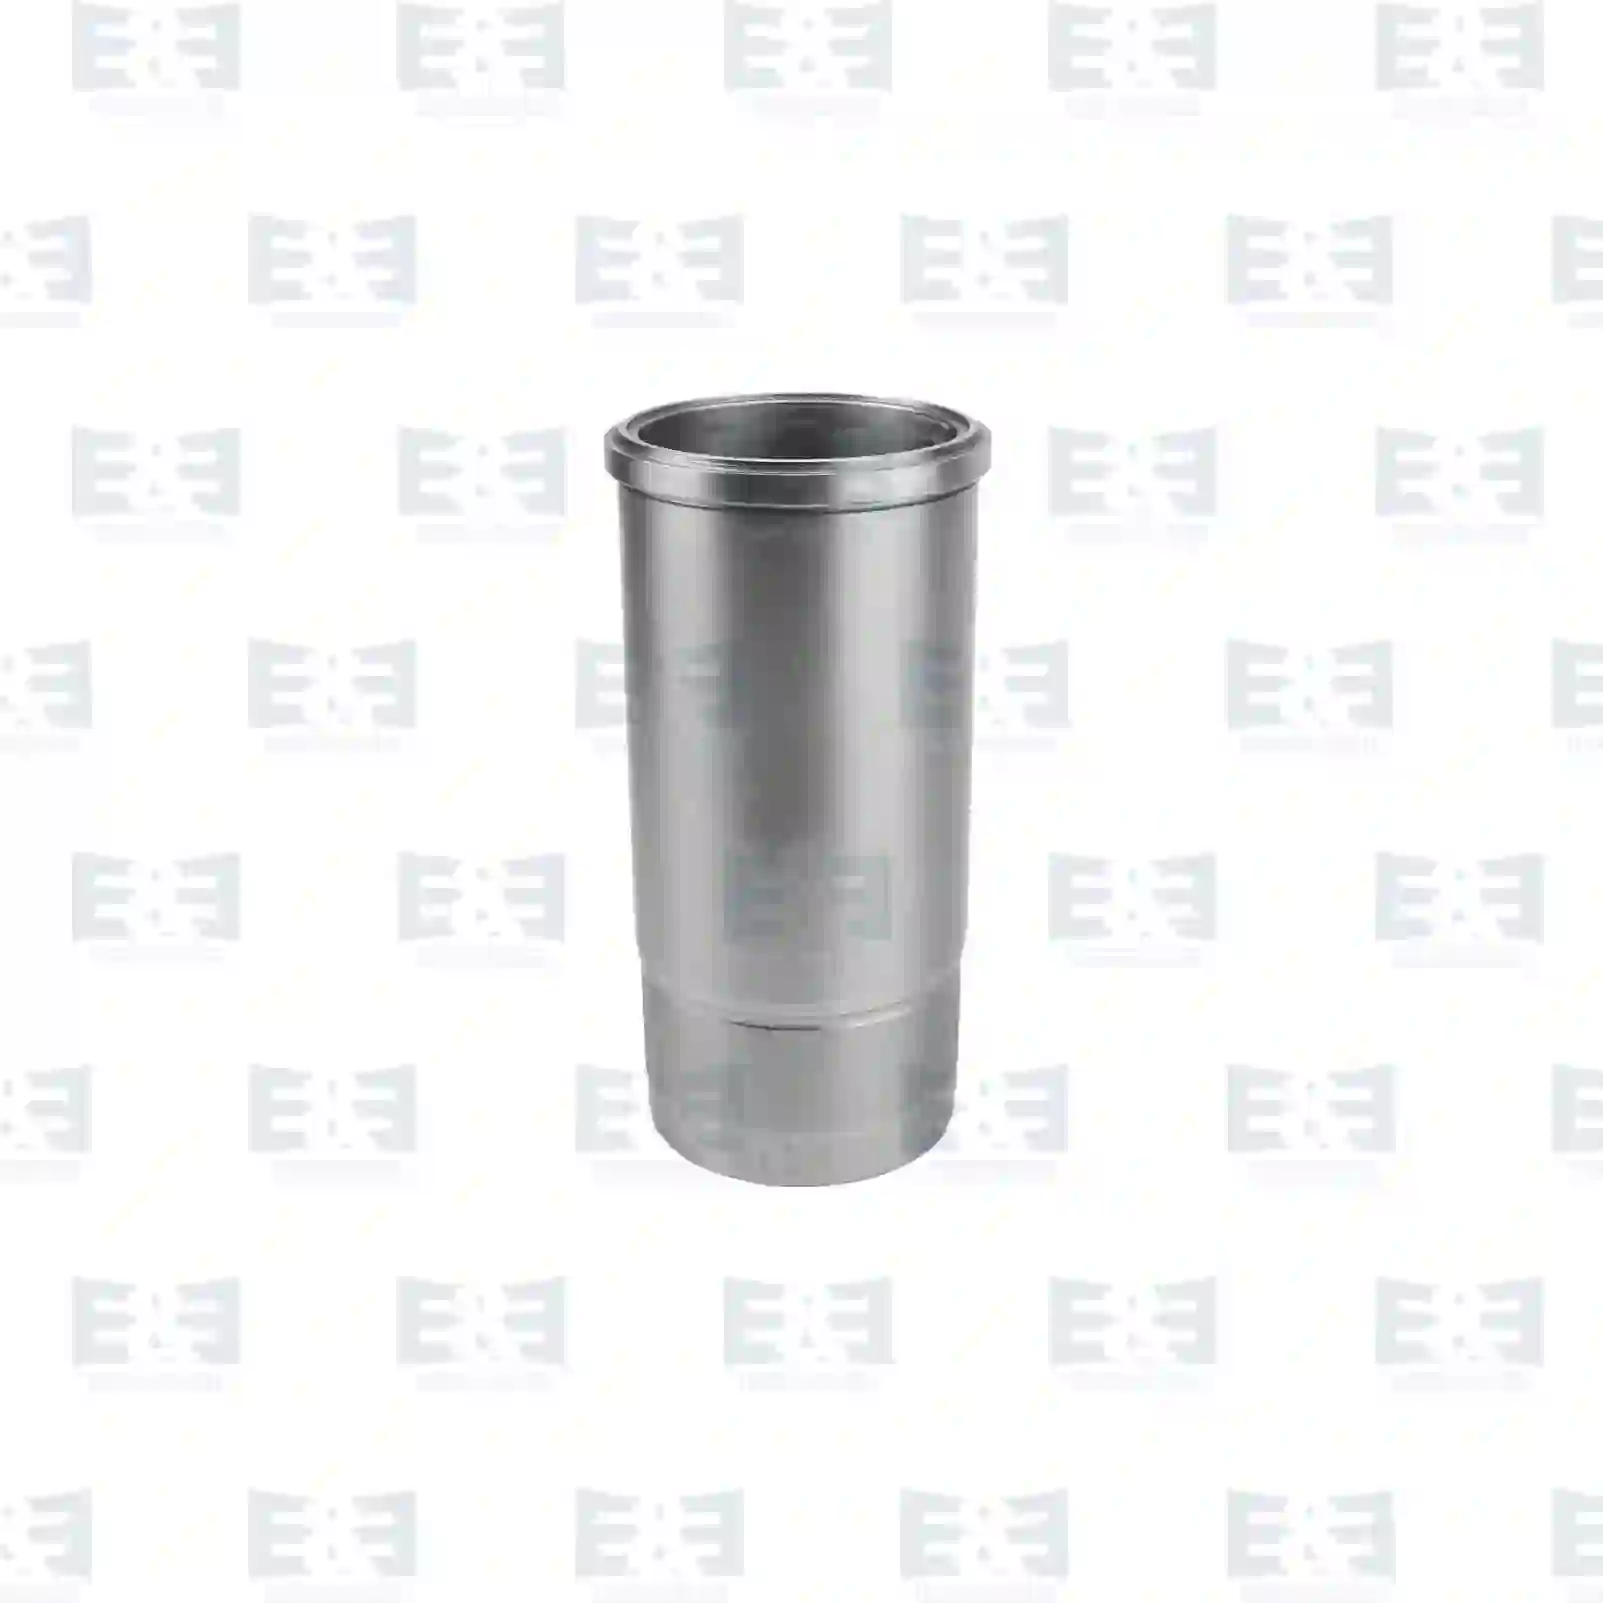 Cylinder liner, without seal rings, 2E2209503, 422860, 479600, 479604, 479684 ||  2E2209503 E&E Truck Spare Parts | Truck Spare Parts, Auotomotive Spare Parts Cylinder liner, without seal rings, 2E2209503, 422860, 479600, 479604, 479684 ||  2E2209503 E&E Truck Spare Parts | Truck Spare Parts, Auotomotive Spare Parts